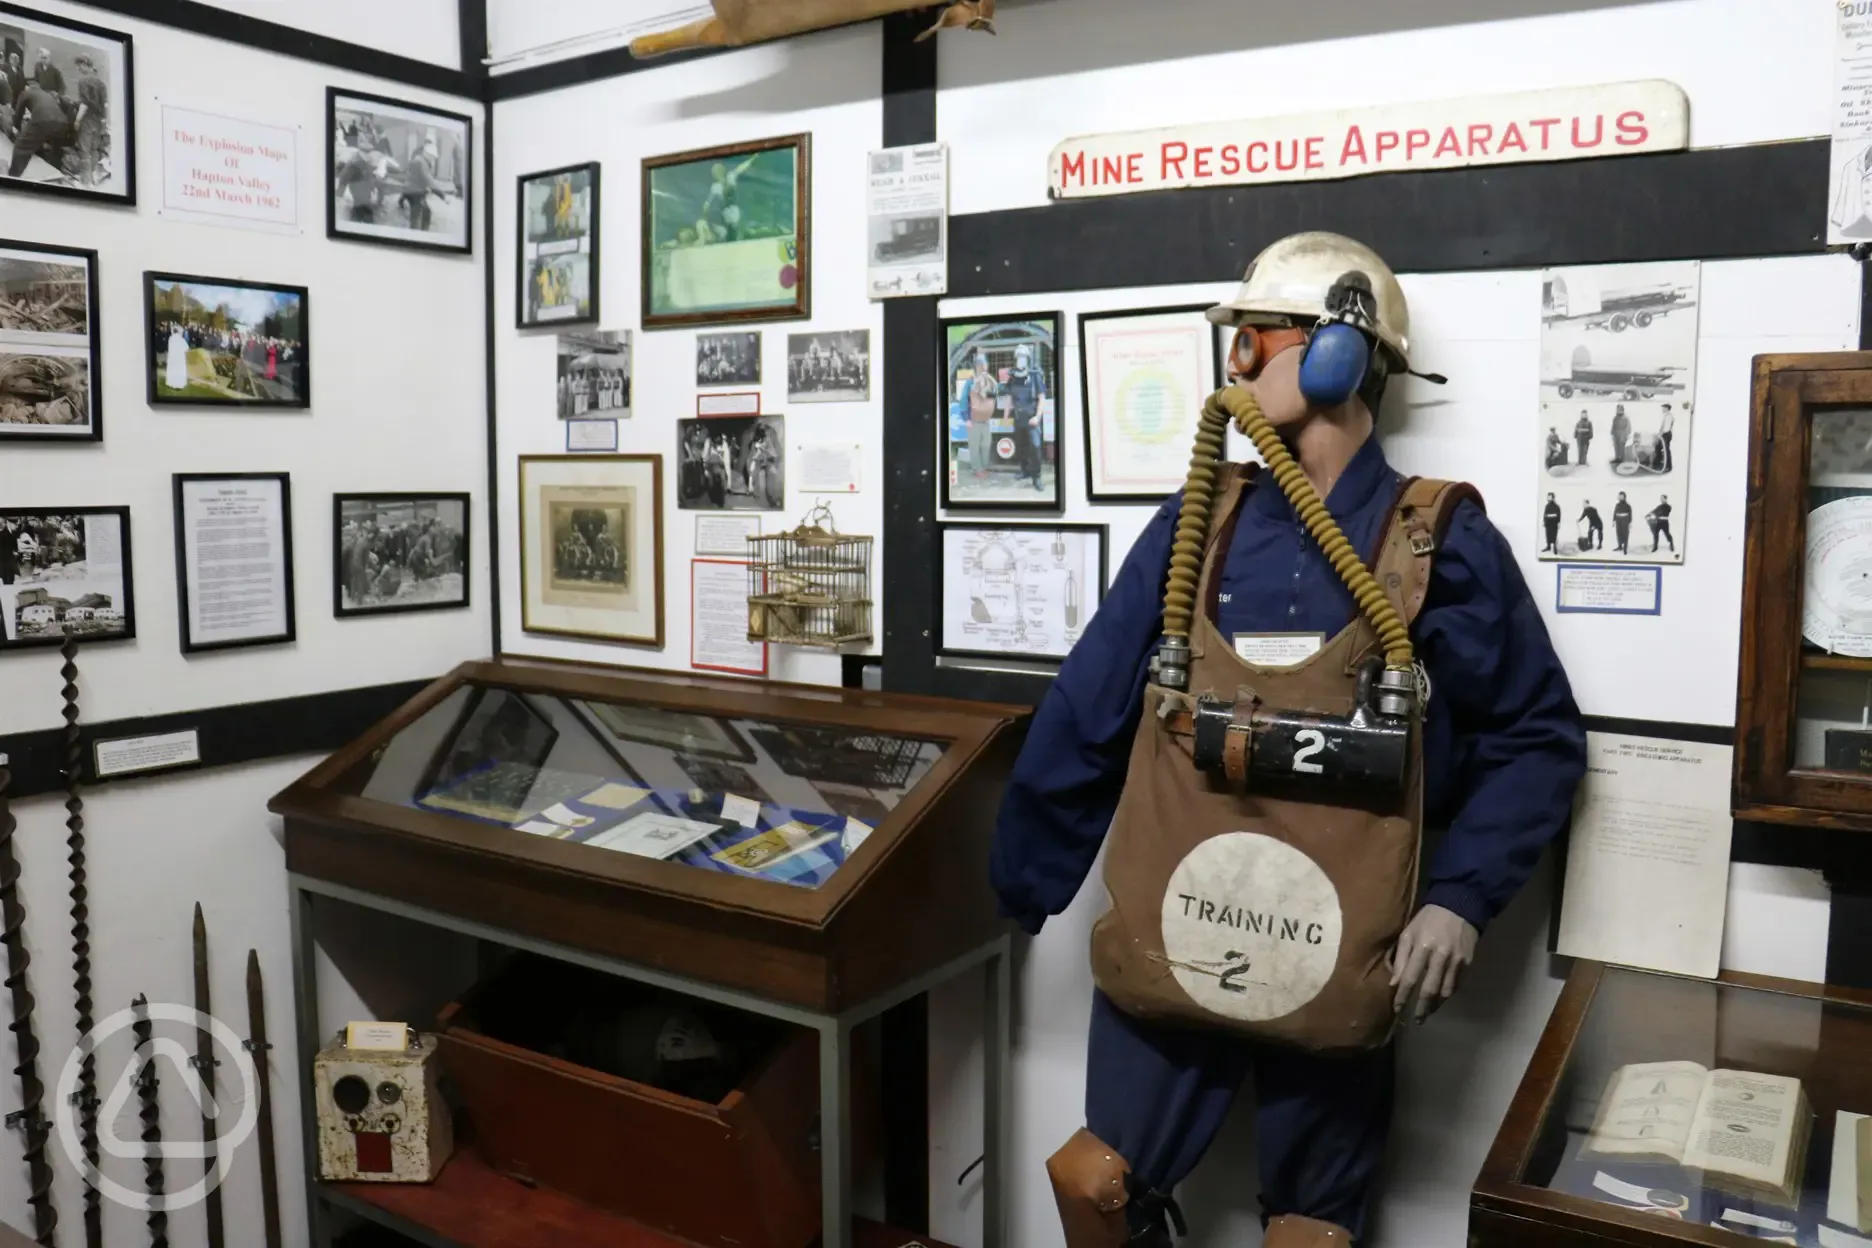 Take time out to visit our Coal Mining Museum